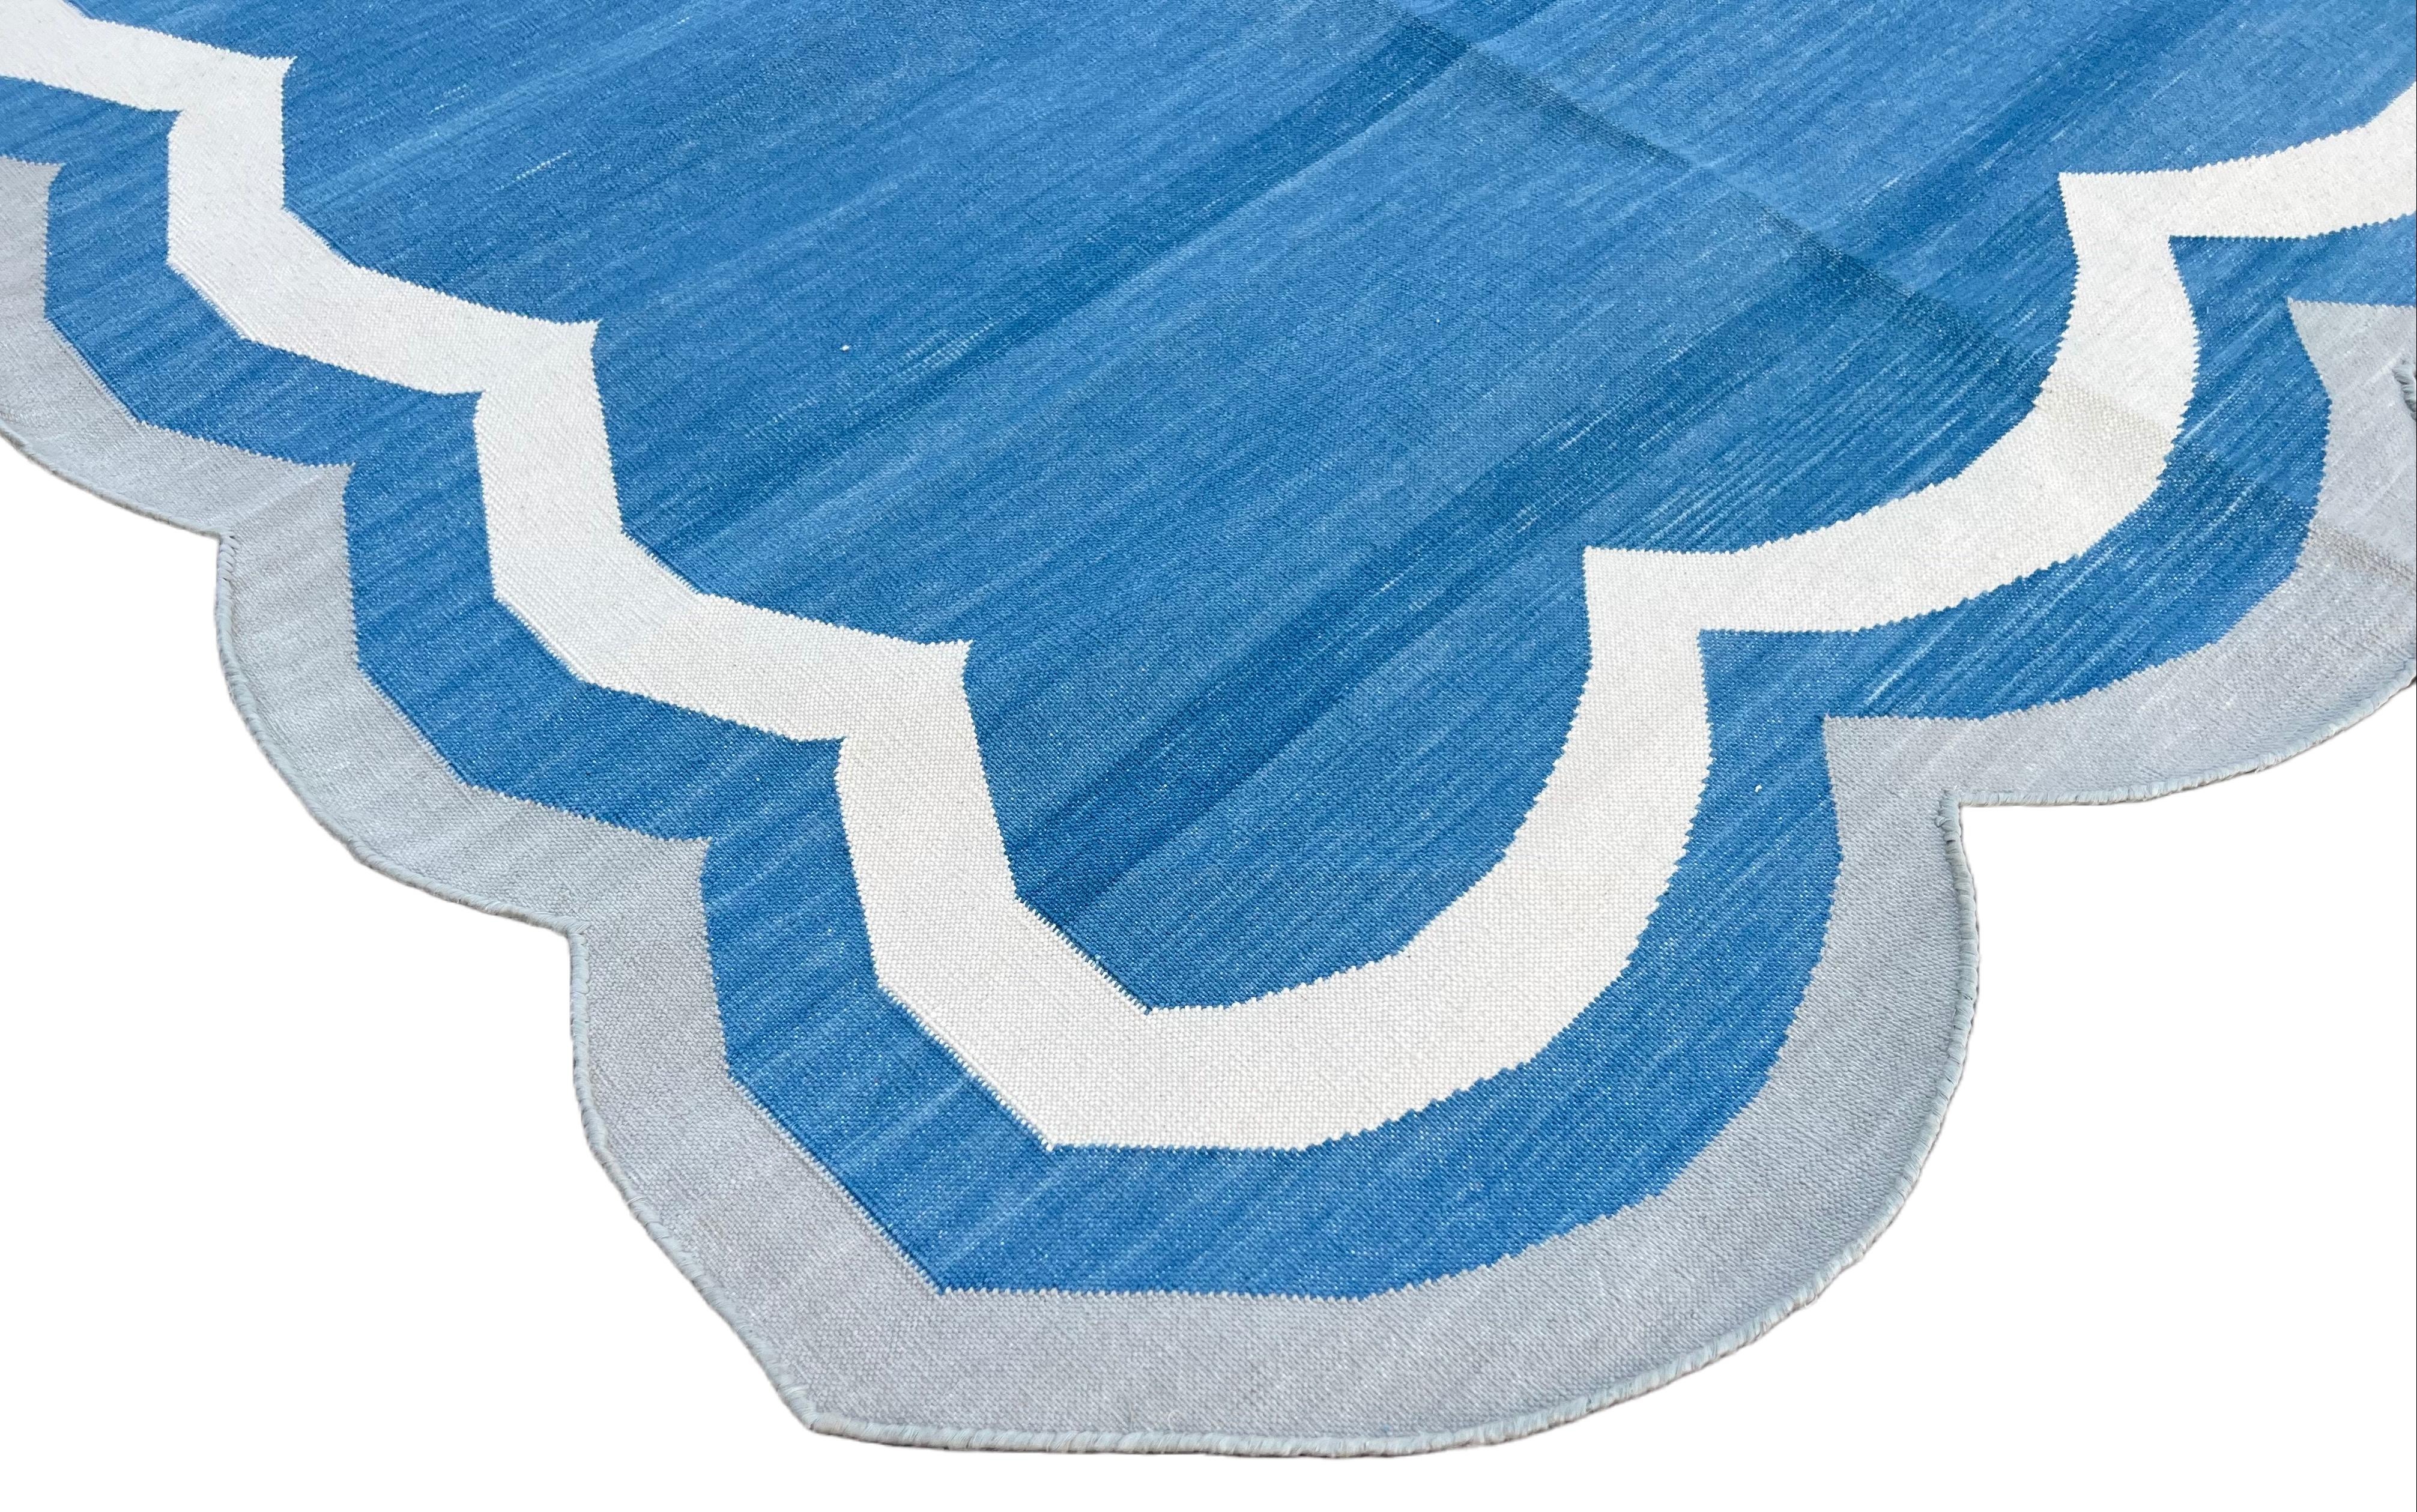 Cotton Vegetable Dyed Blue and Grey 4 Sided Indian Scalloped Rug - 8'x10'
These special flat-weave dhurries are hand-woven with 15 ply 100% cotton yarn. Due to the special manufacturing techniques used to create our rugs, the size and color of each